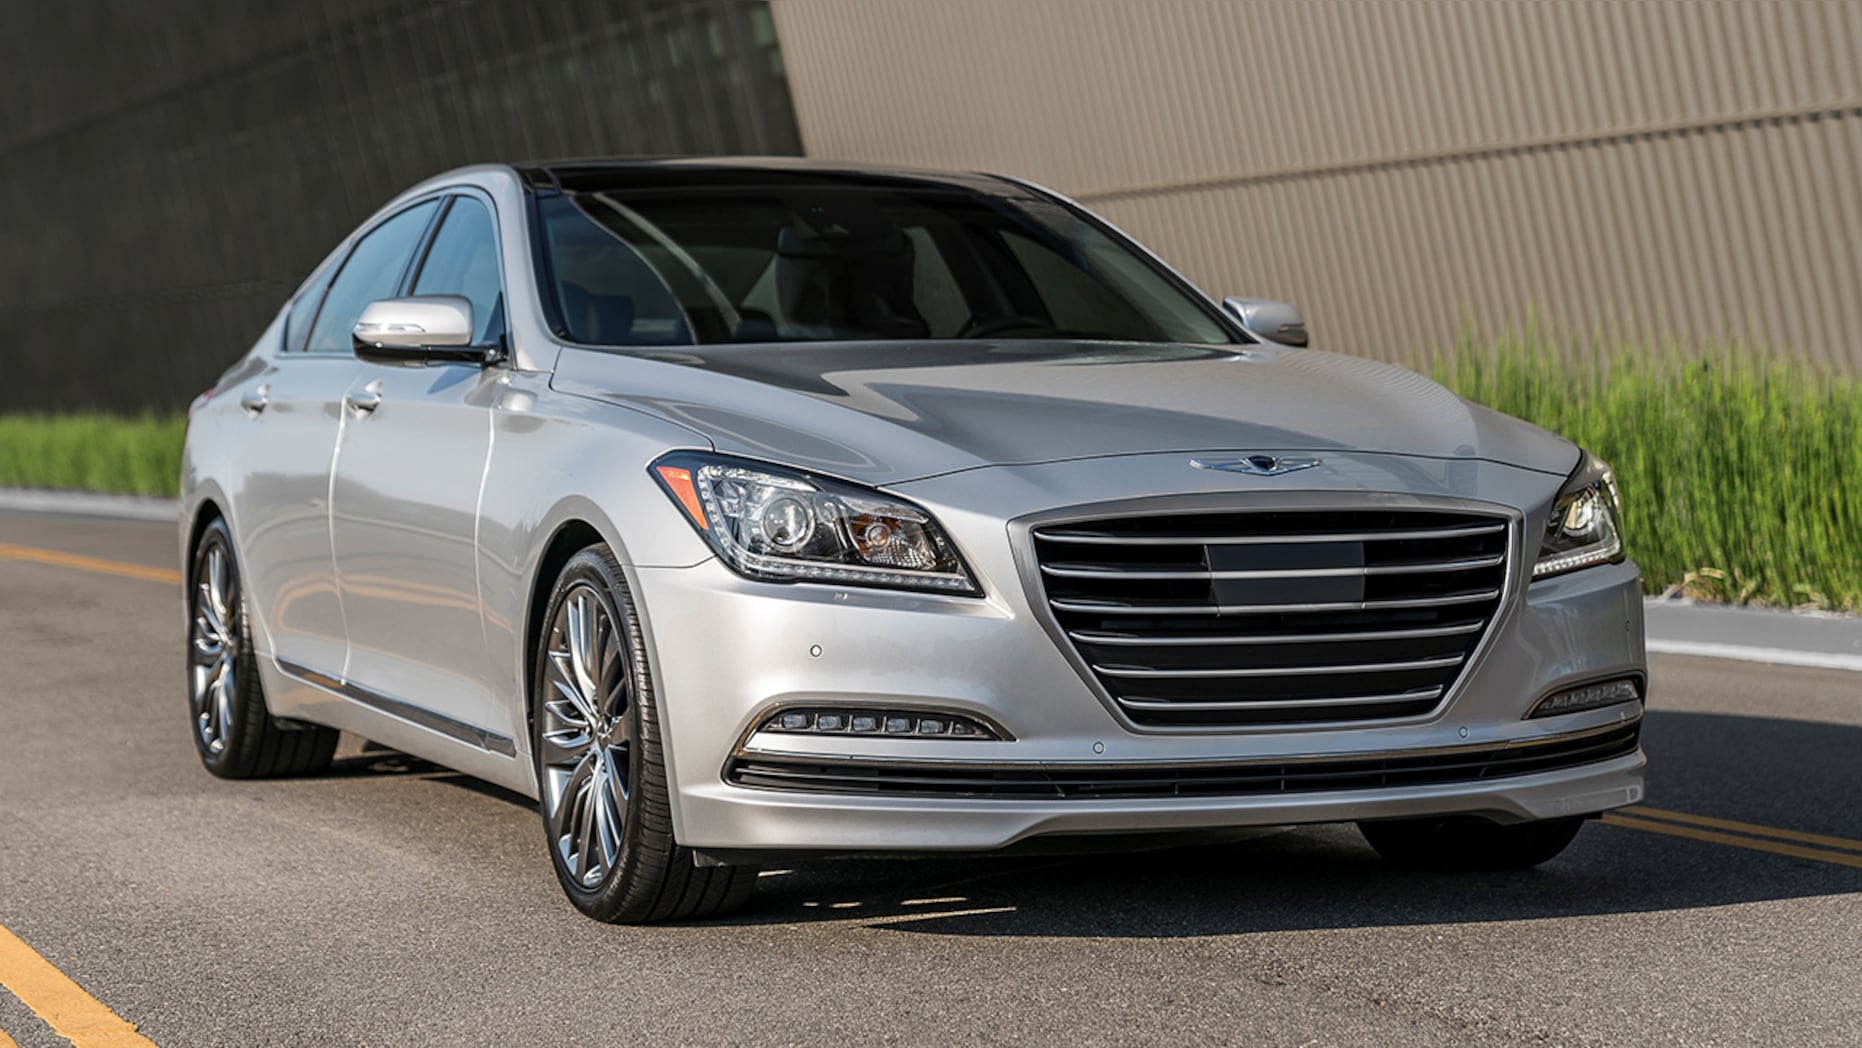 Hyundai's Genesis division recalling 95,000 cars for fire risk